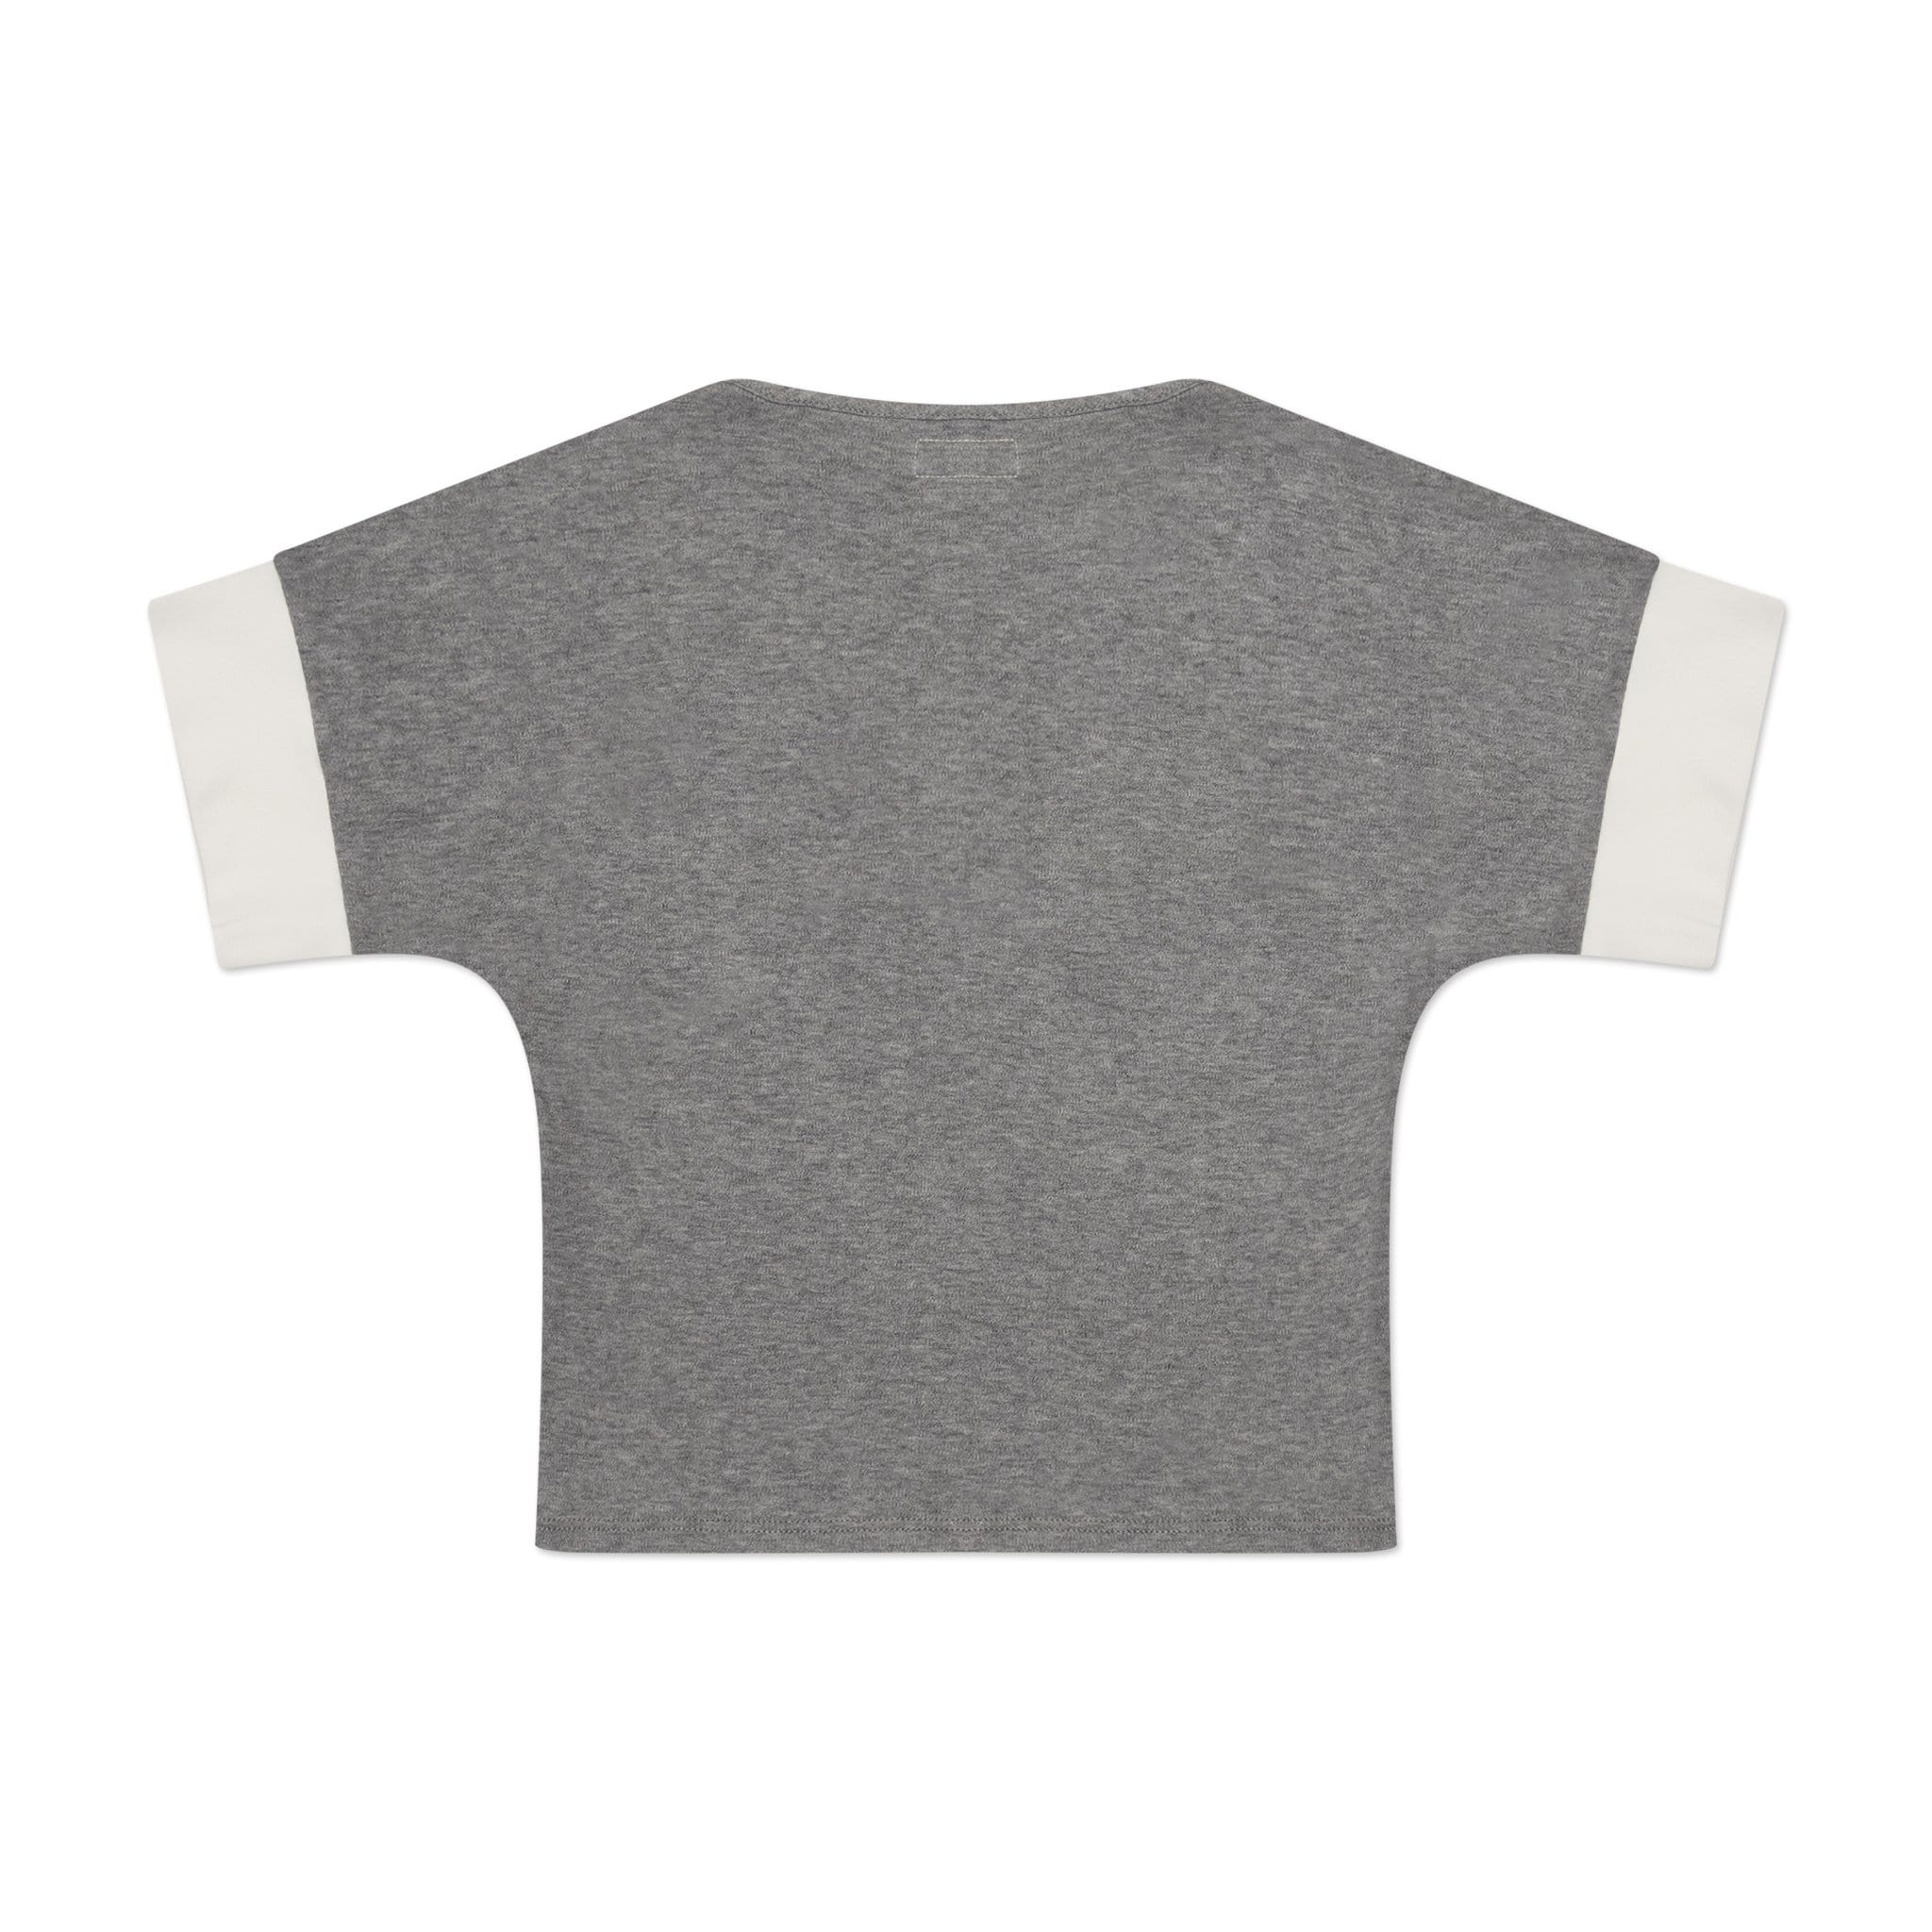 High quality girls tee that is durable, sustainable, and eco-friendly. Made from organic cotton. 